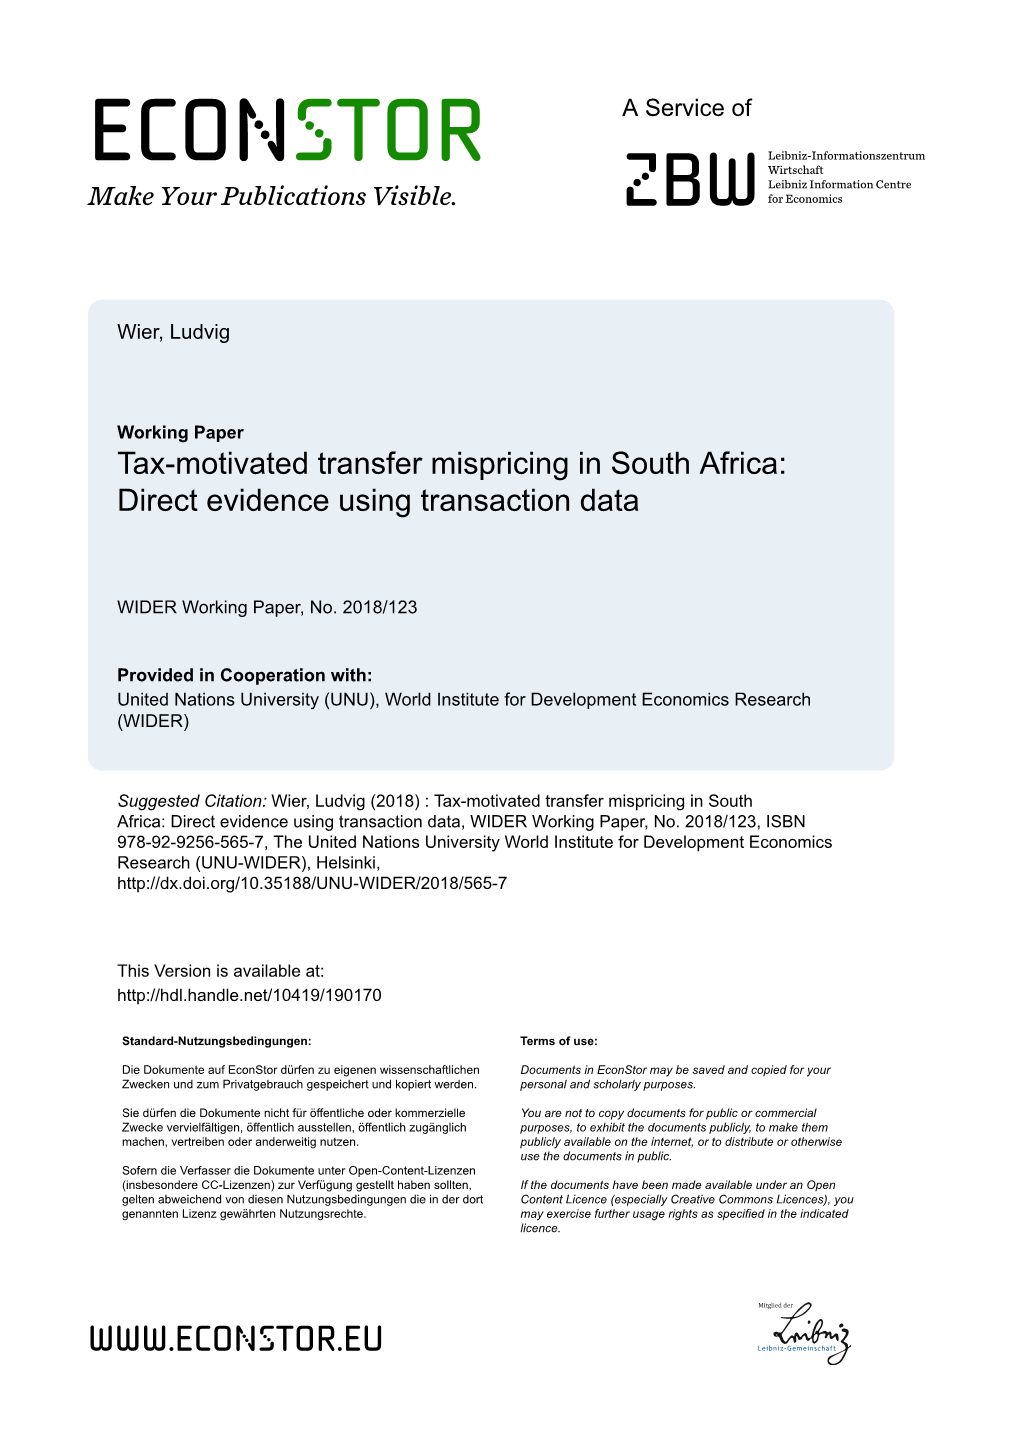 WIDER Working Paper 2018/123: Tax-Motivated Transfer Mispricing In